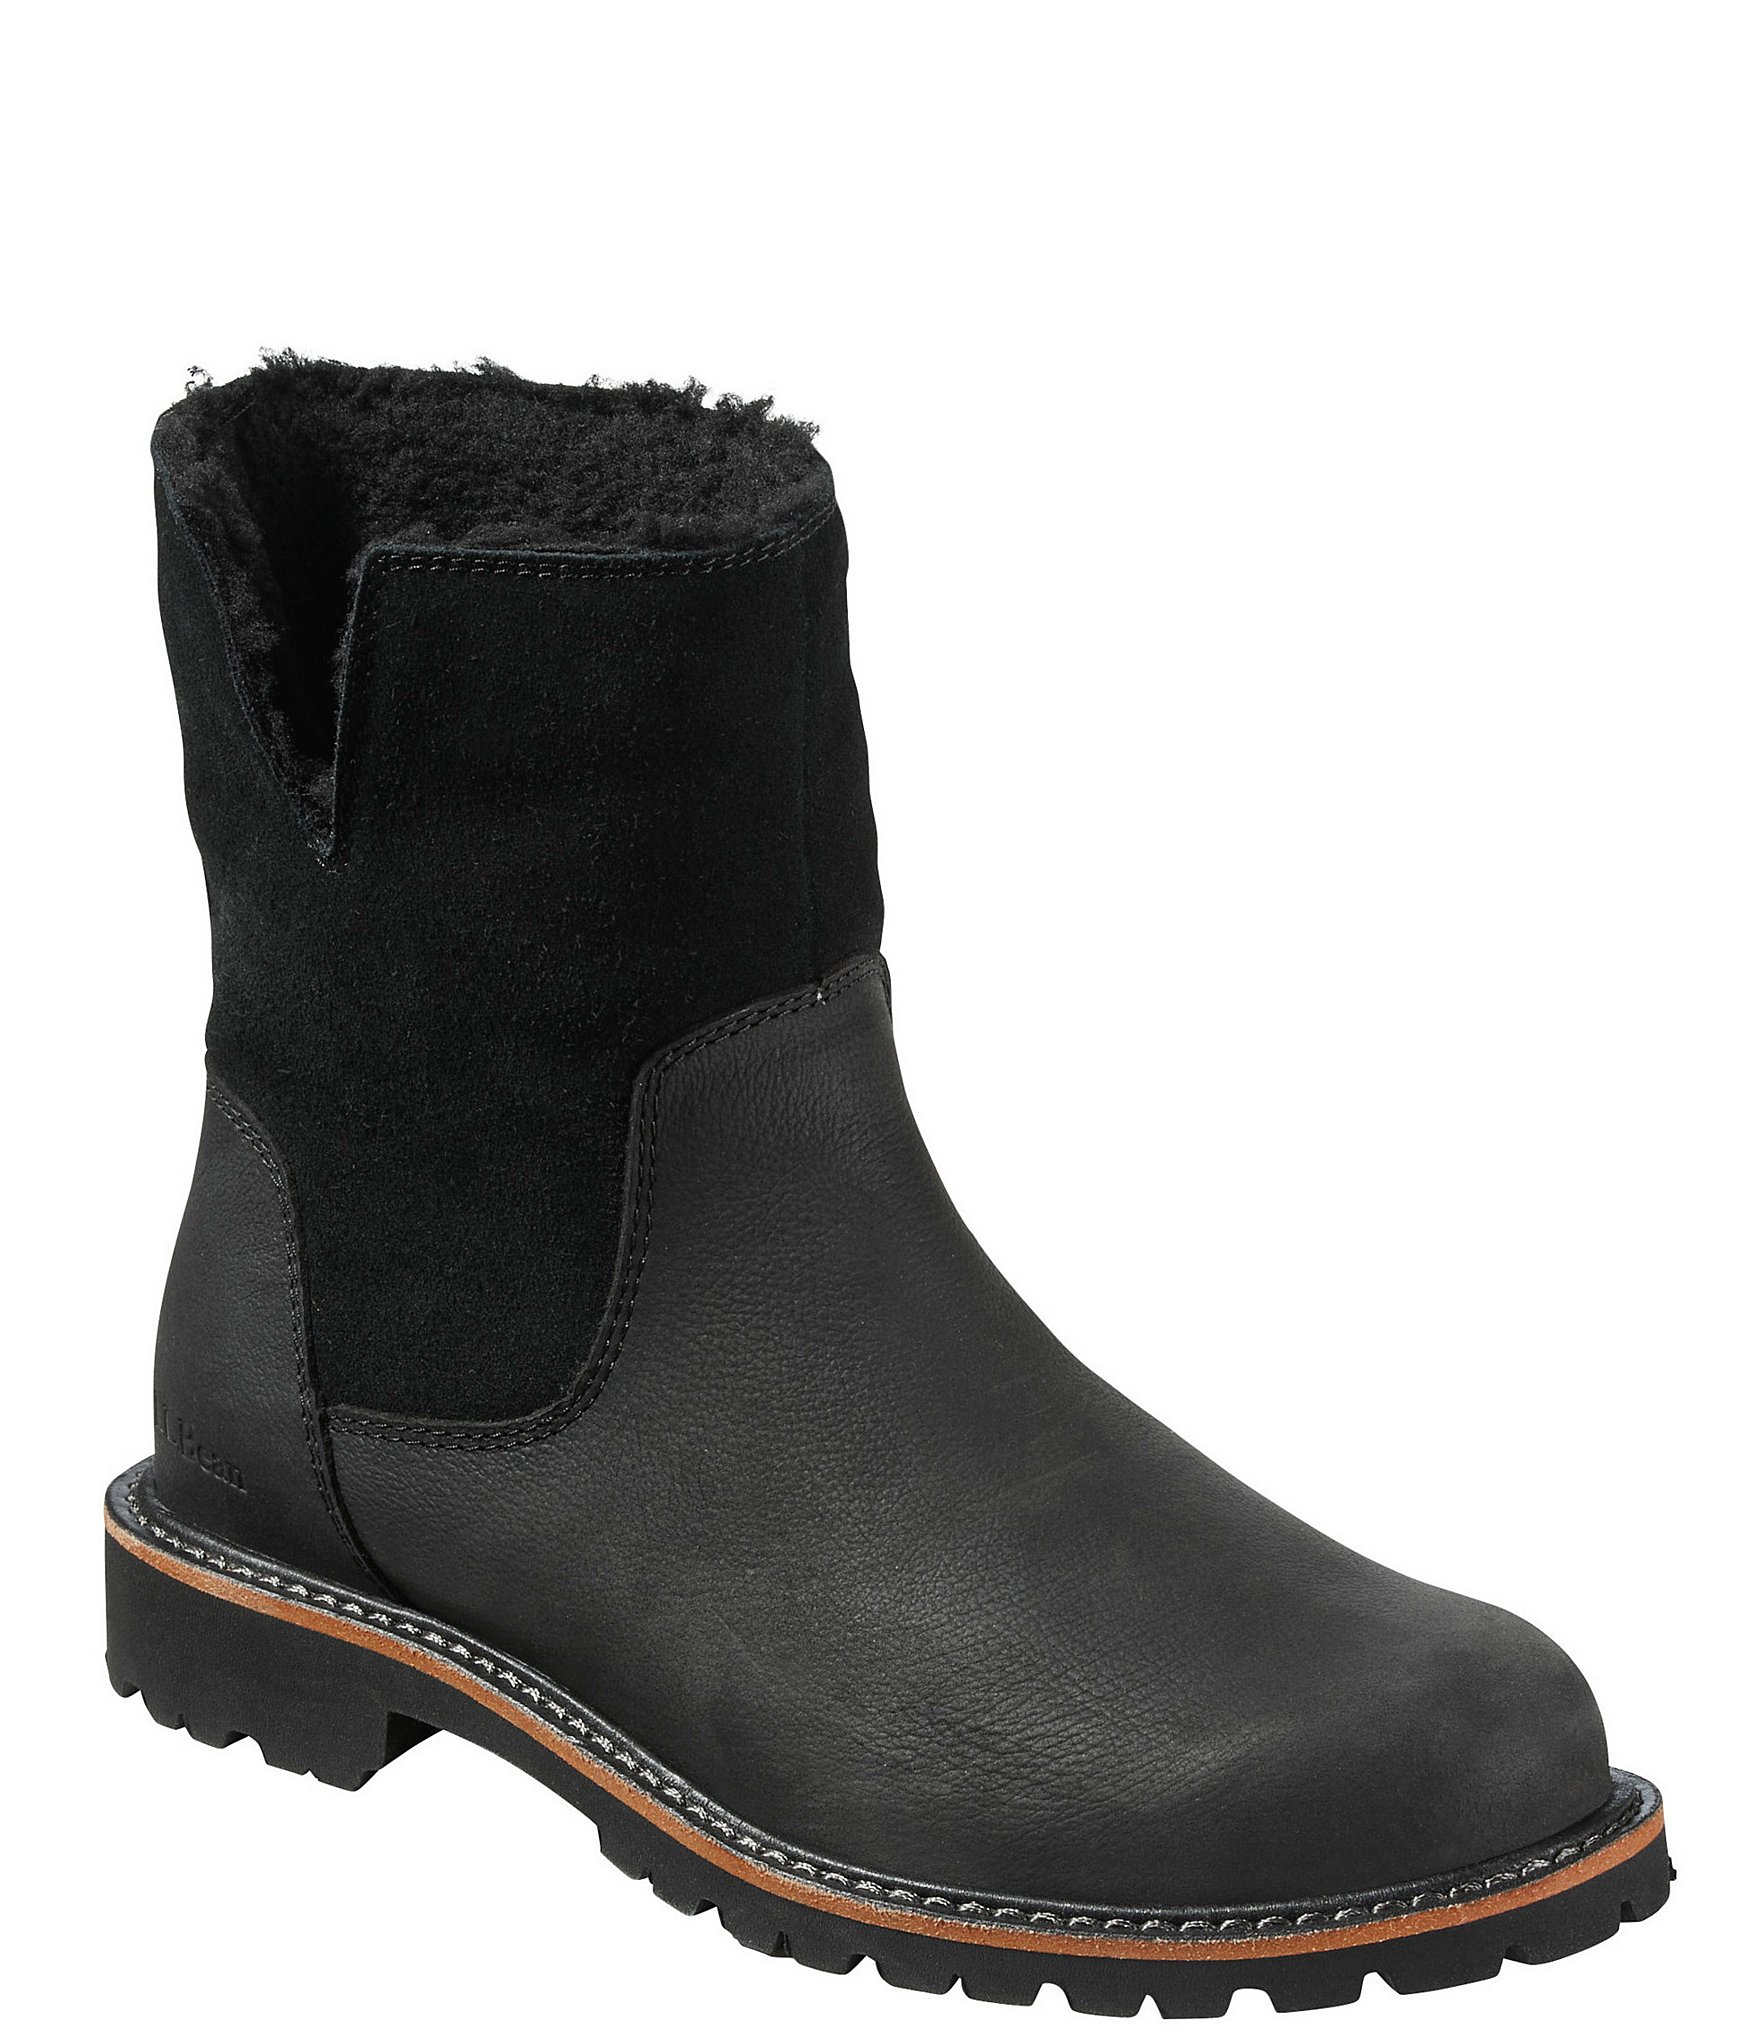 L.L.Bean Women's Rugged Cozy Water-Resistant Lug Sole Cold Weather ...